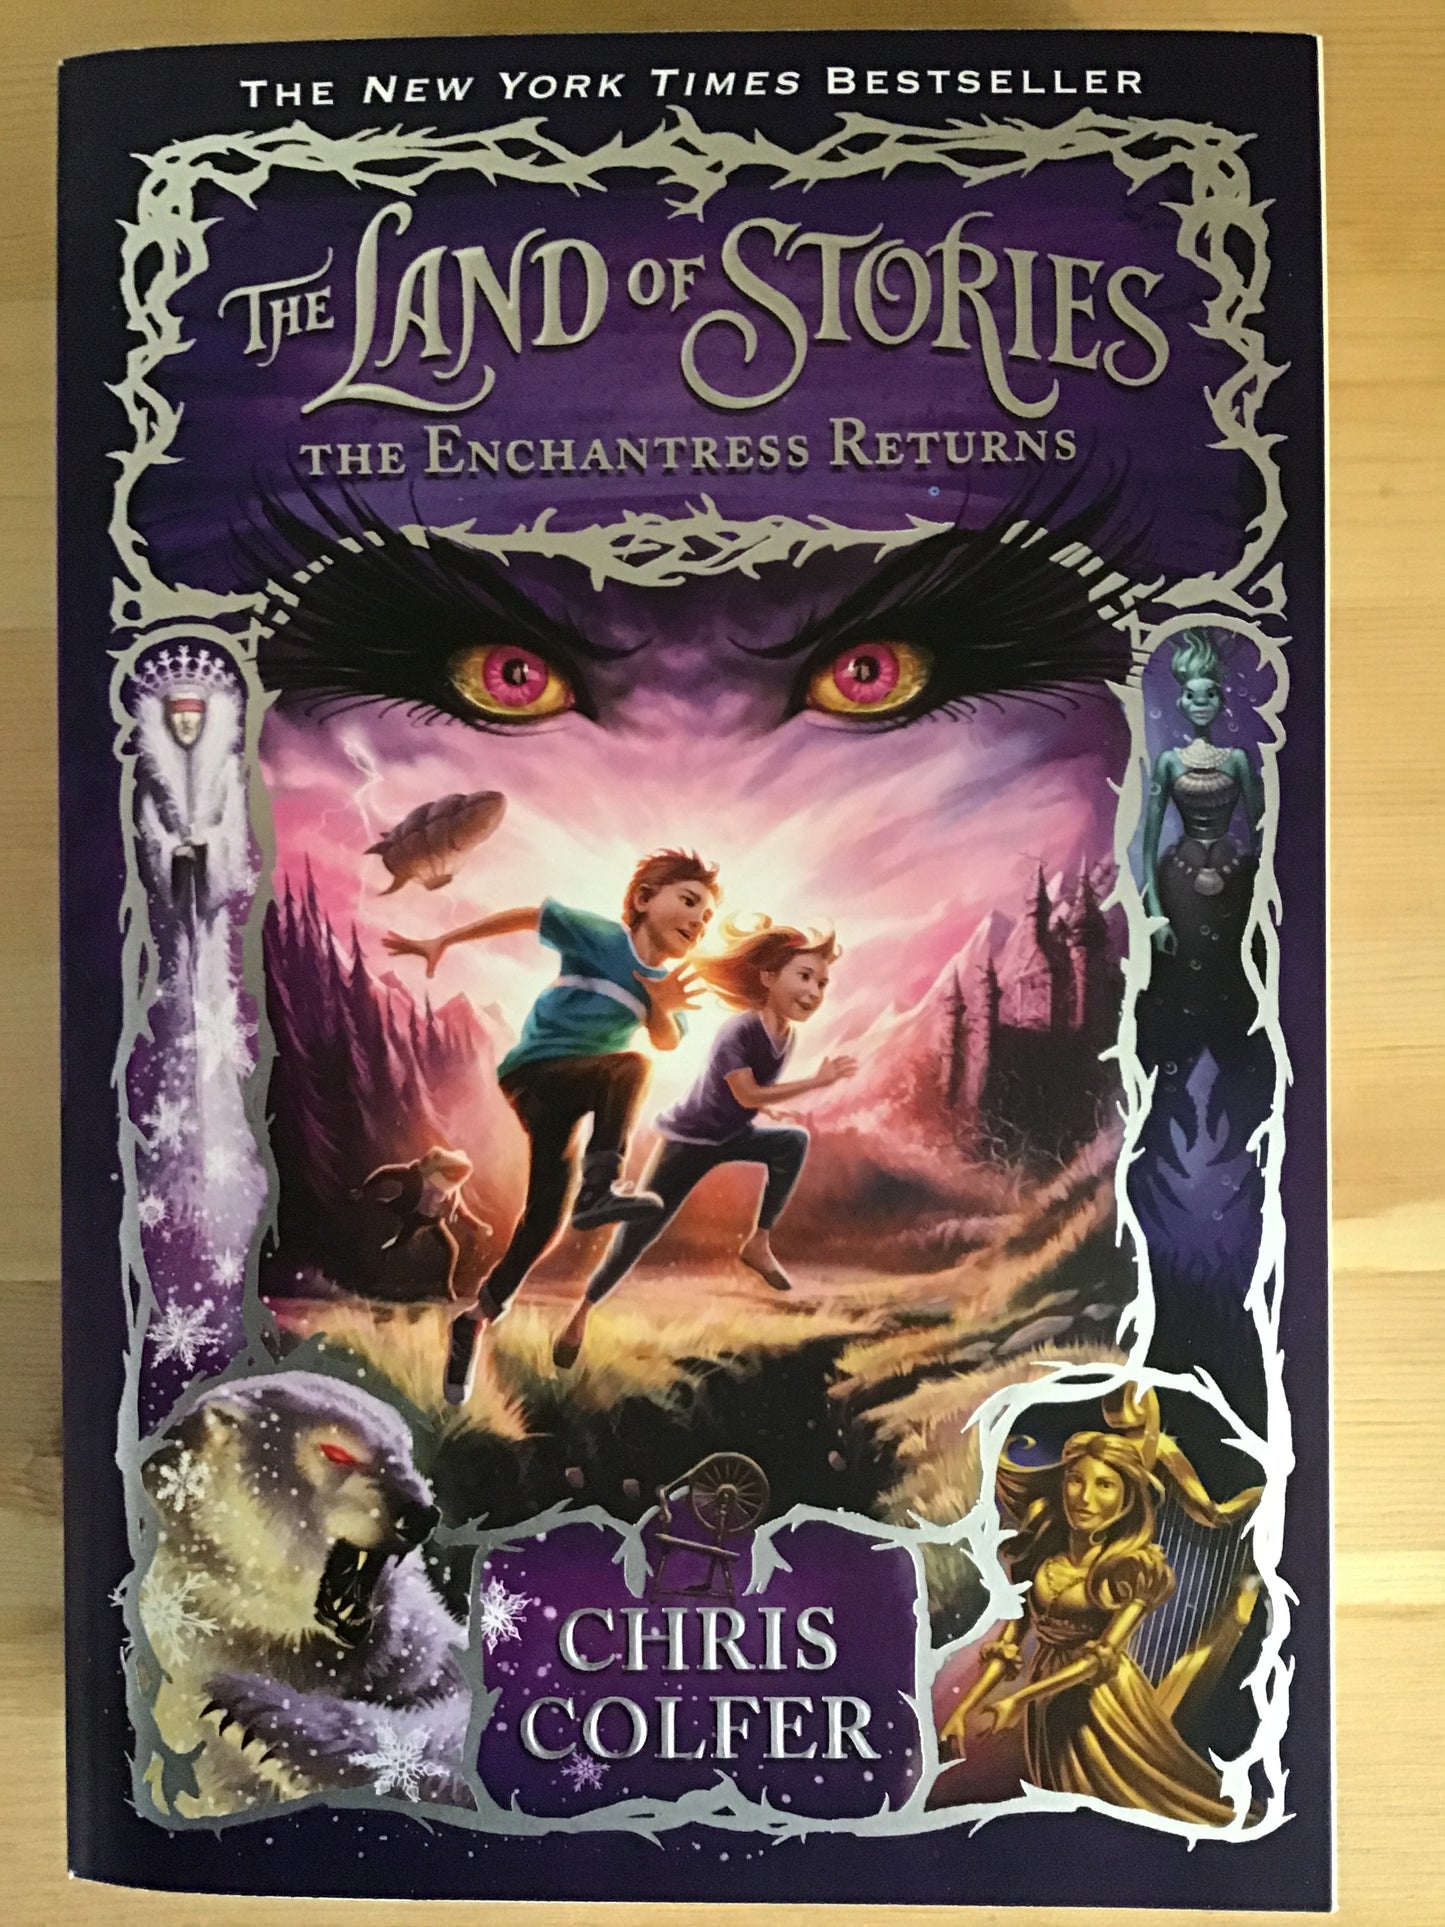 The Land of Stories #2: The Enchantress Returns